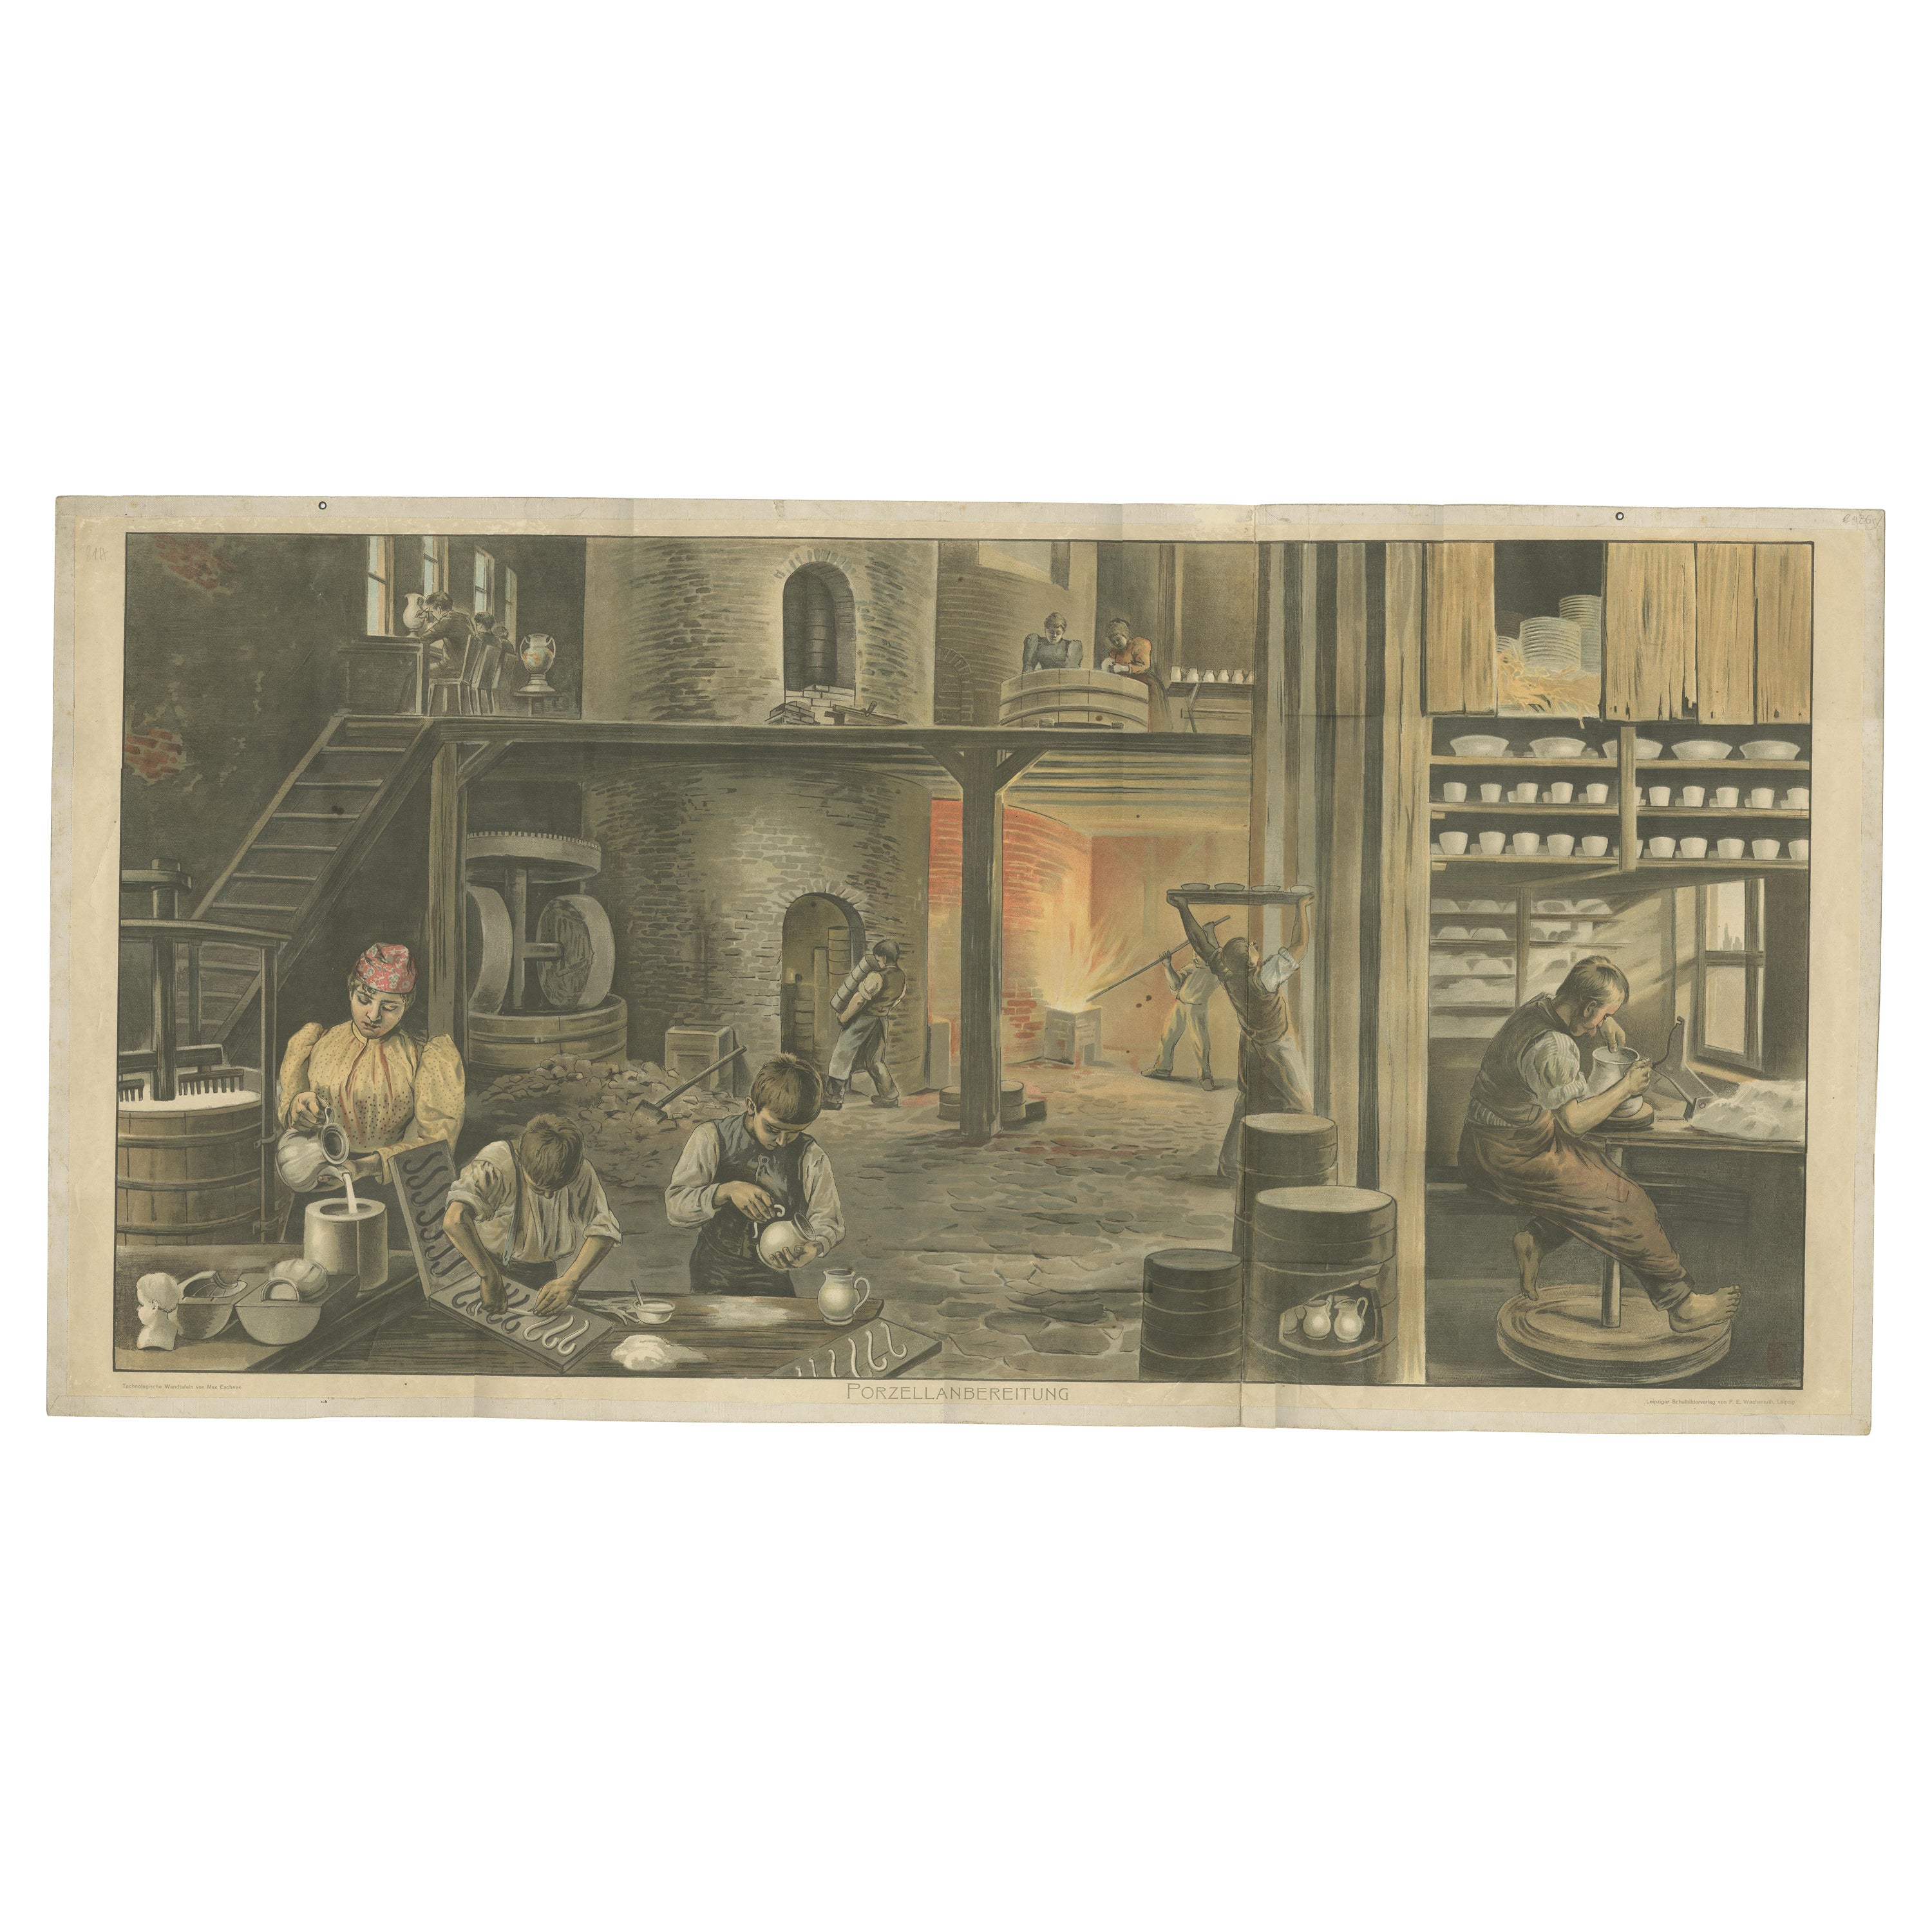 Large Color Lithograph of a Porcelain Factory in the 19th Century, 1895